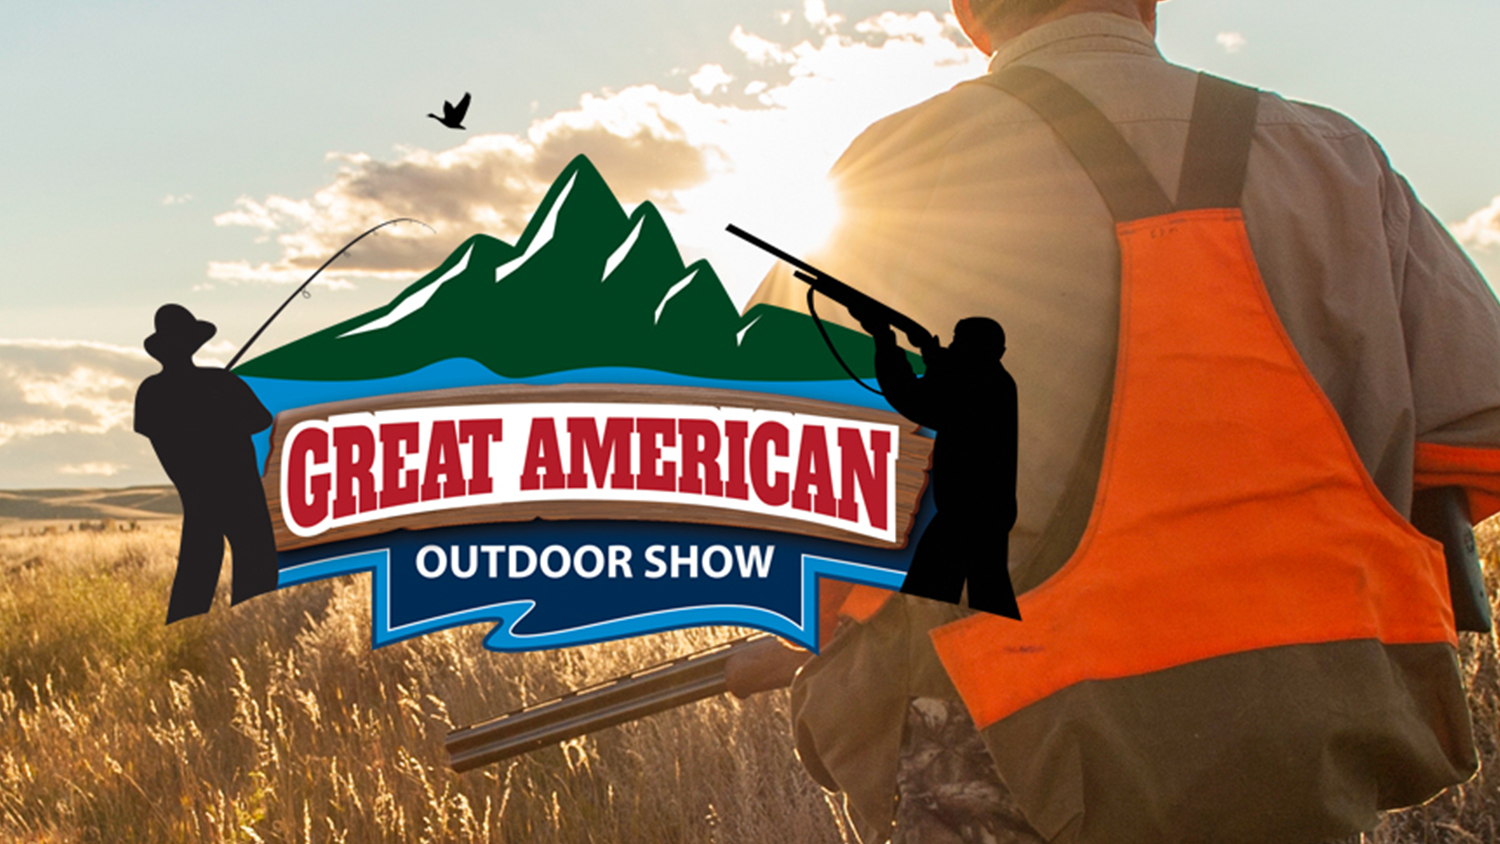 Great American Outdoor Show Events: Tuesday, February 9th 